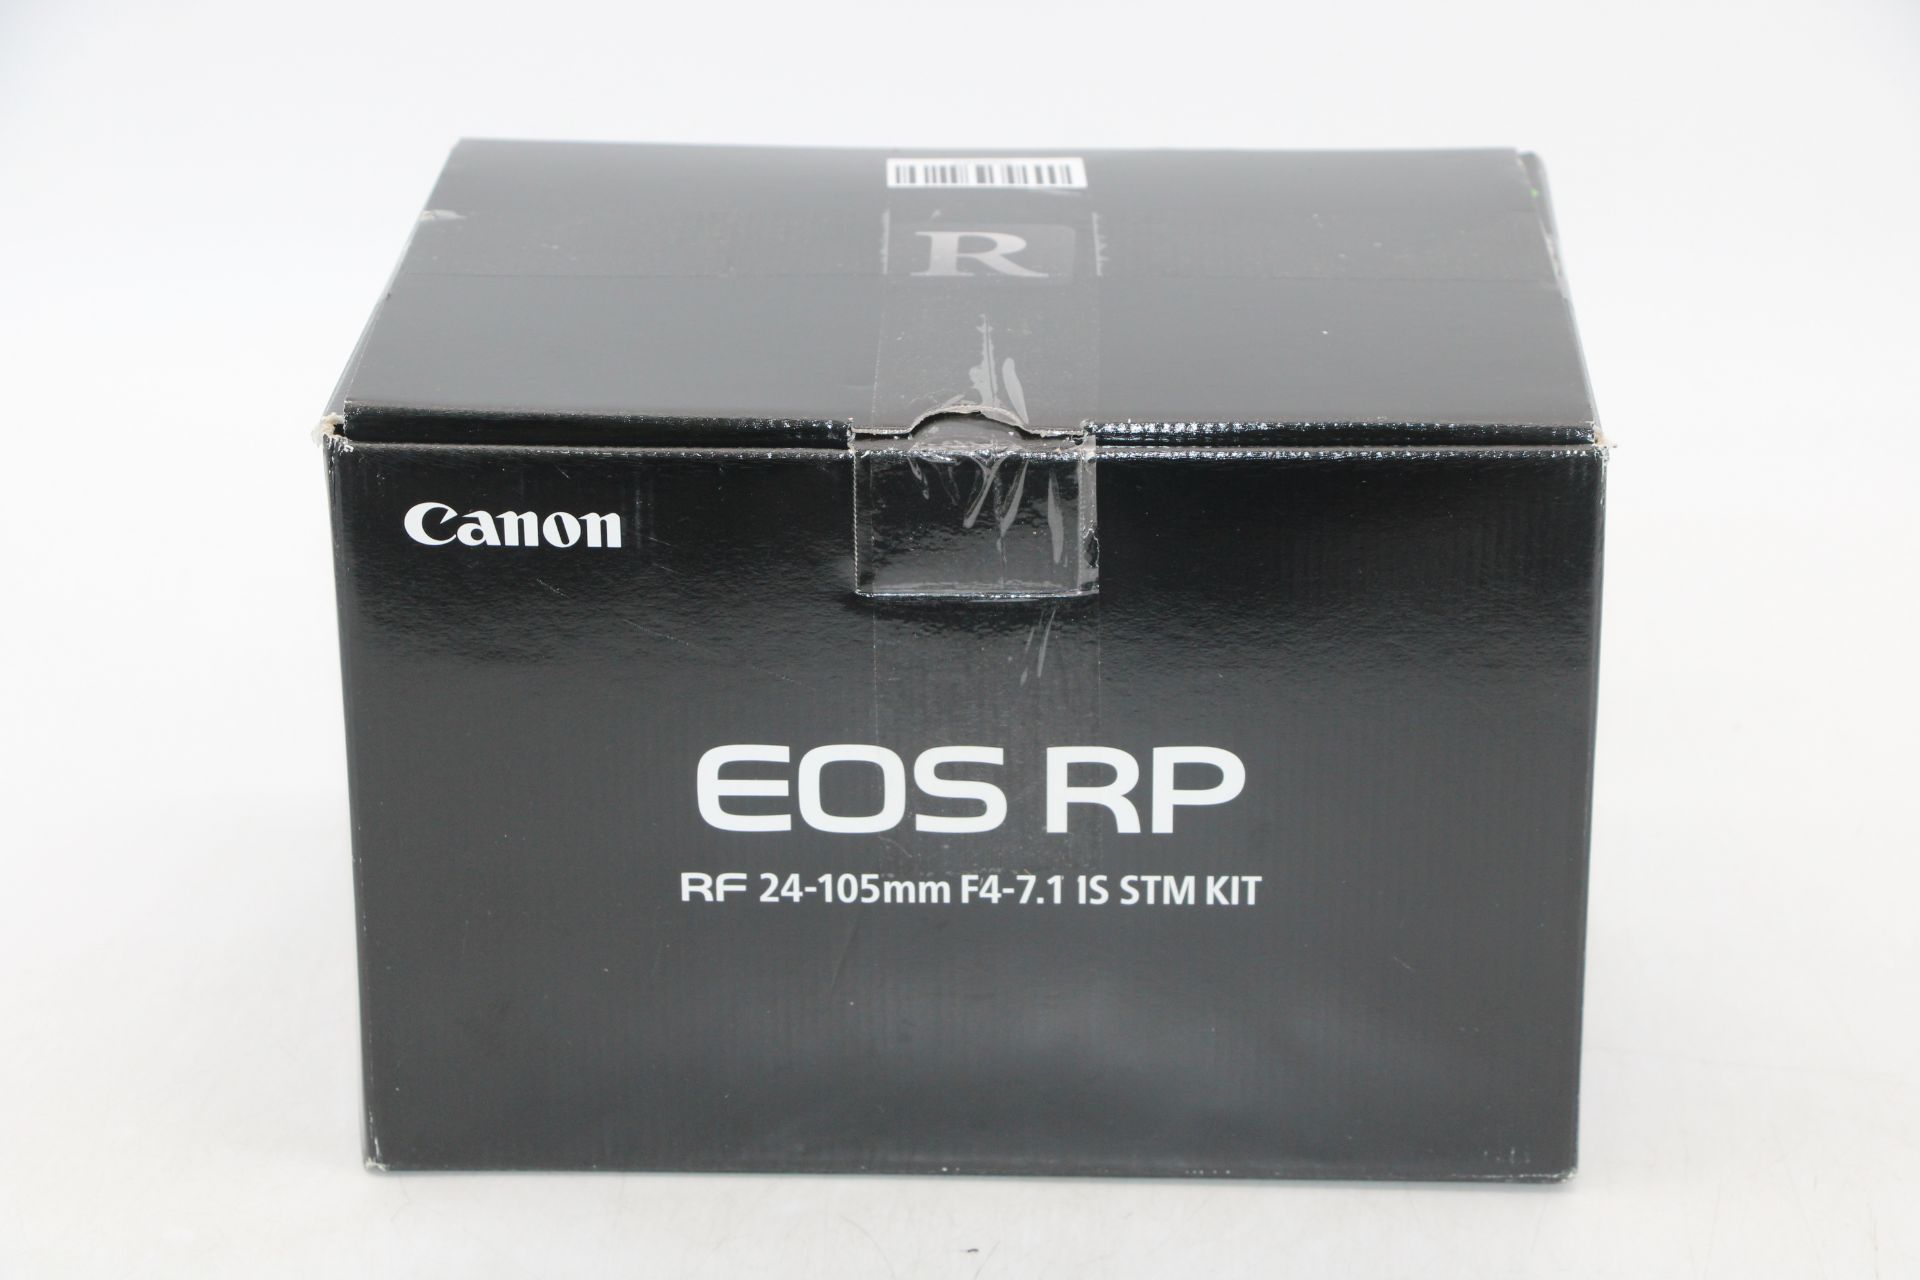 Canon EOS RP Camera, Body Only. Box damaged, Not tested - Image 2 of 2